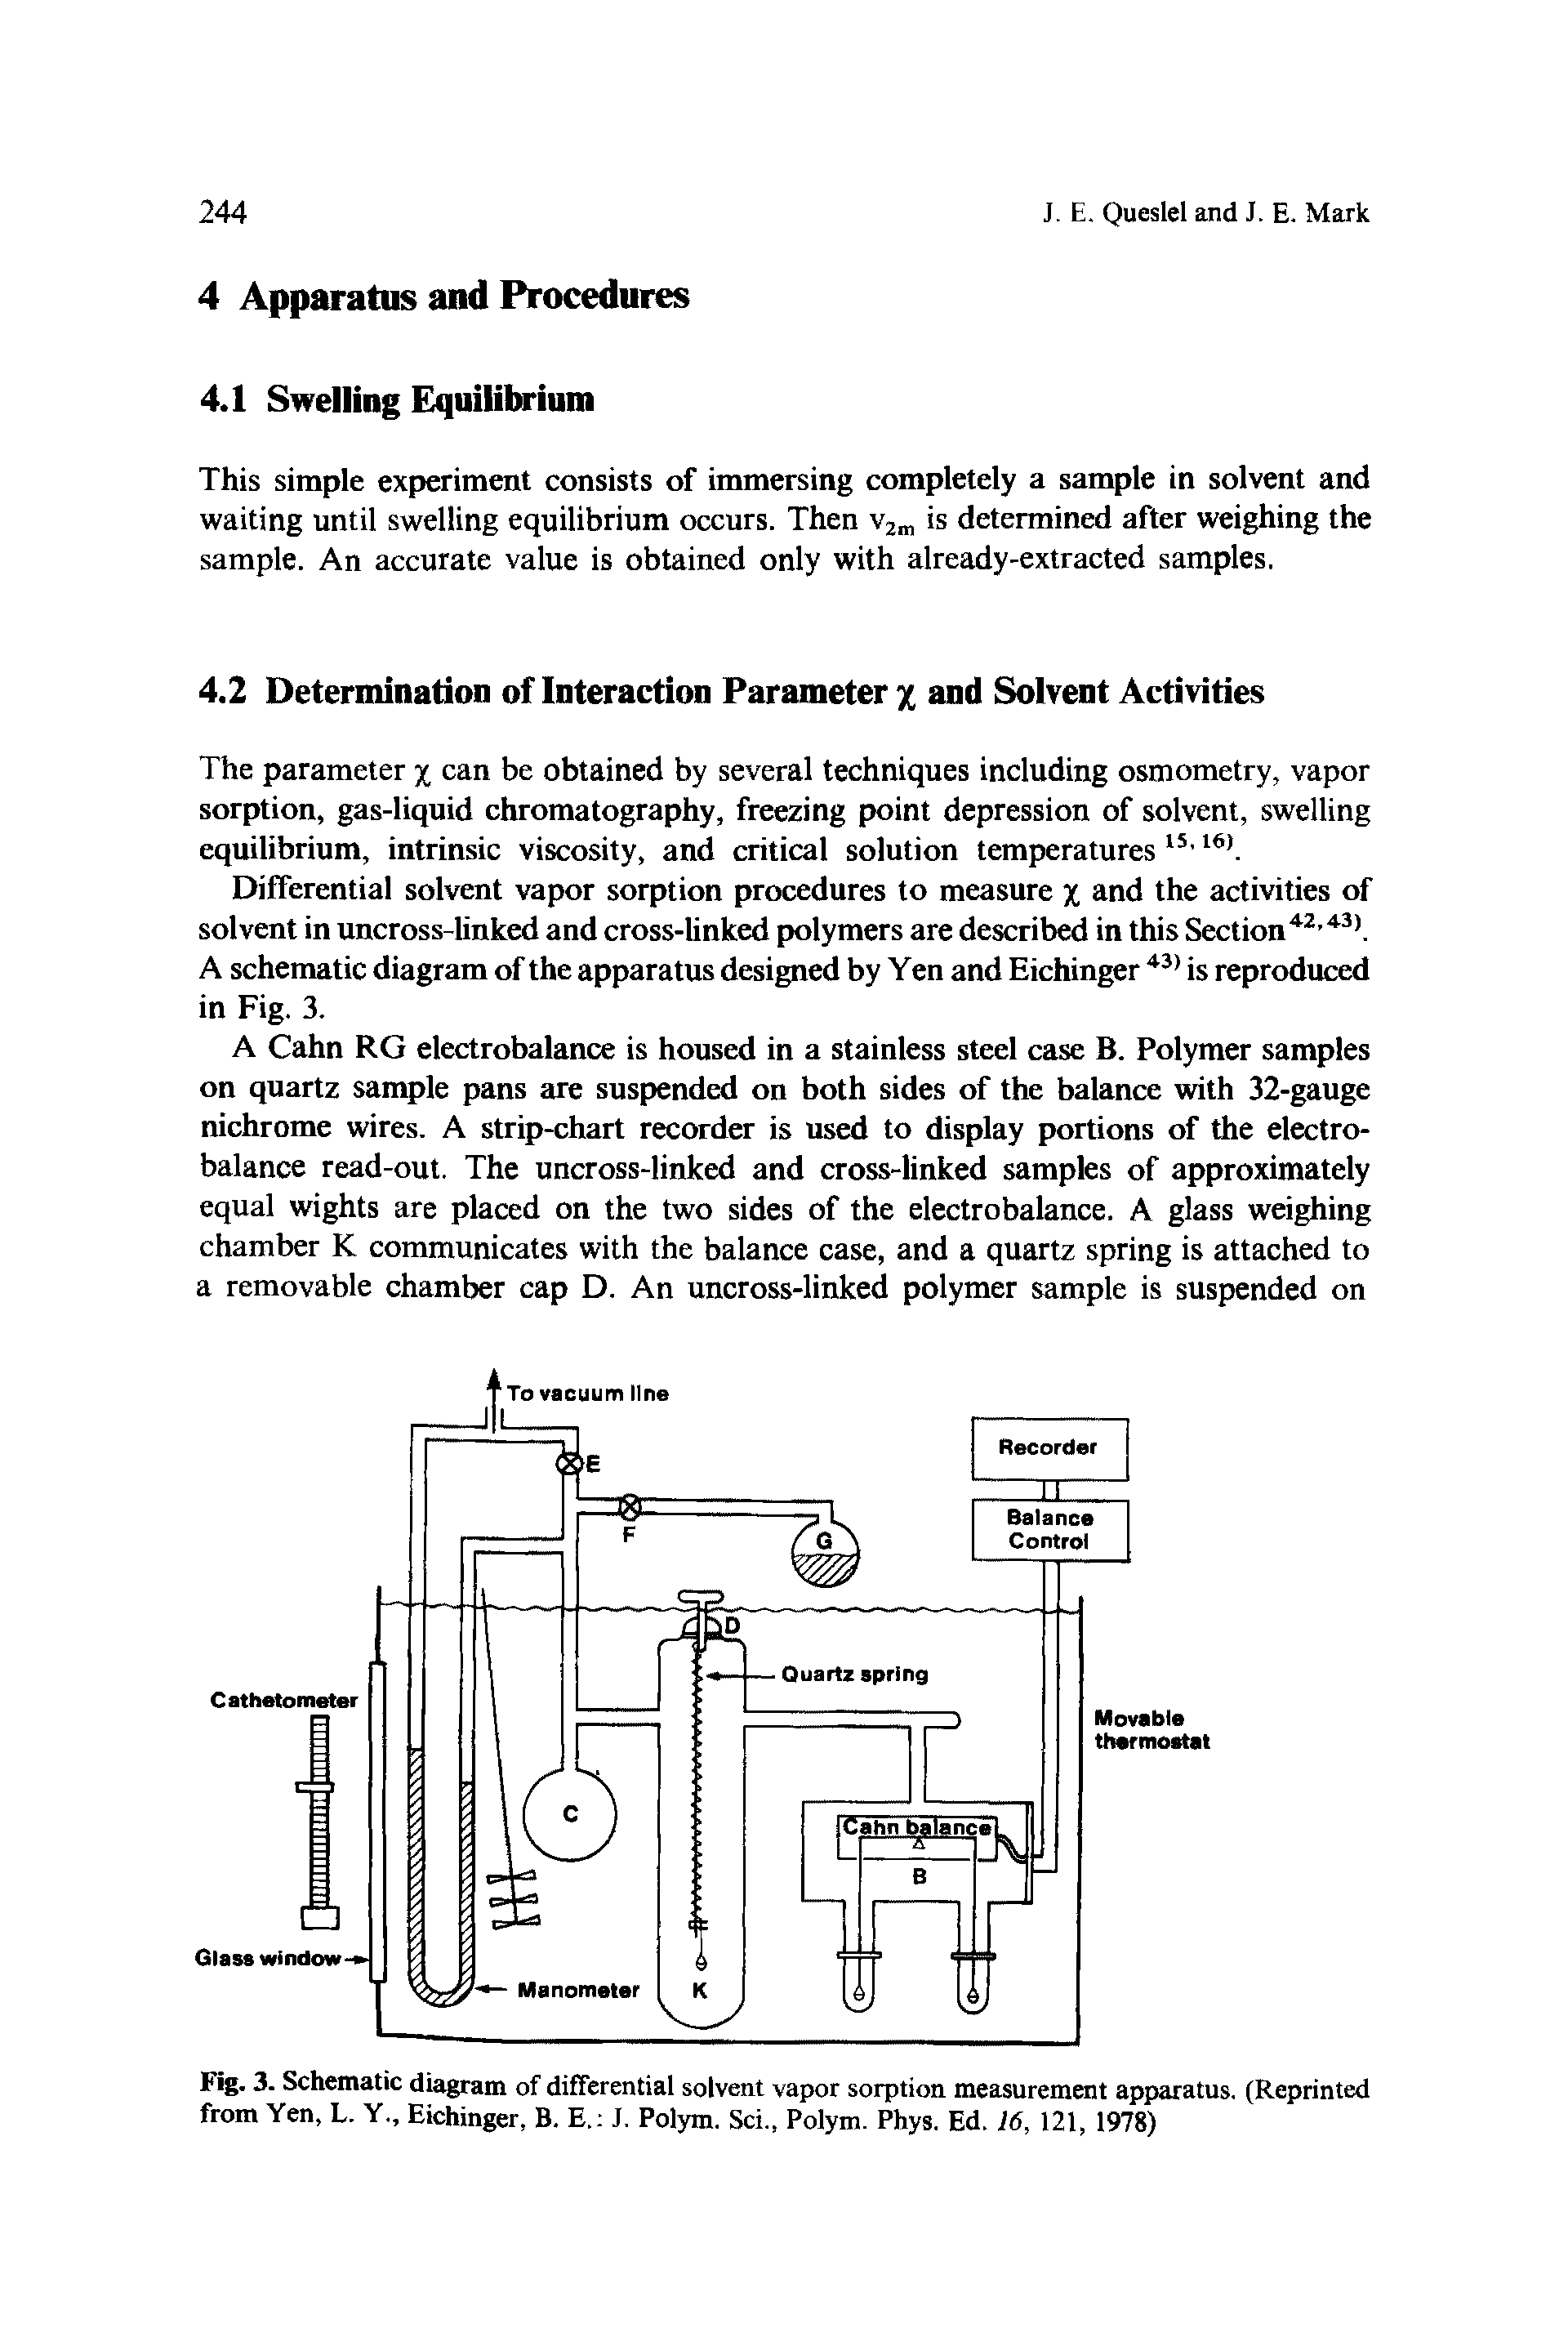 Fig. 3. Schematic diagram of differential solvent vapor sorption measurement apparatus. (Reprinted from Yen, L. Y., Eichinger, B. E. J. Polym. Sci., Polym. Phys. Ed. 16, 121, 1978)...